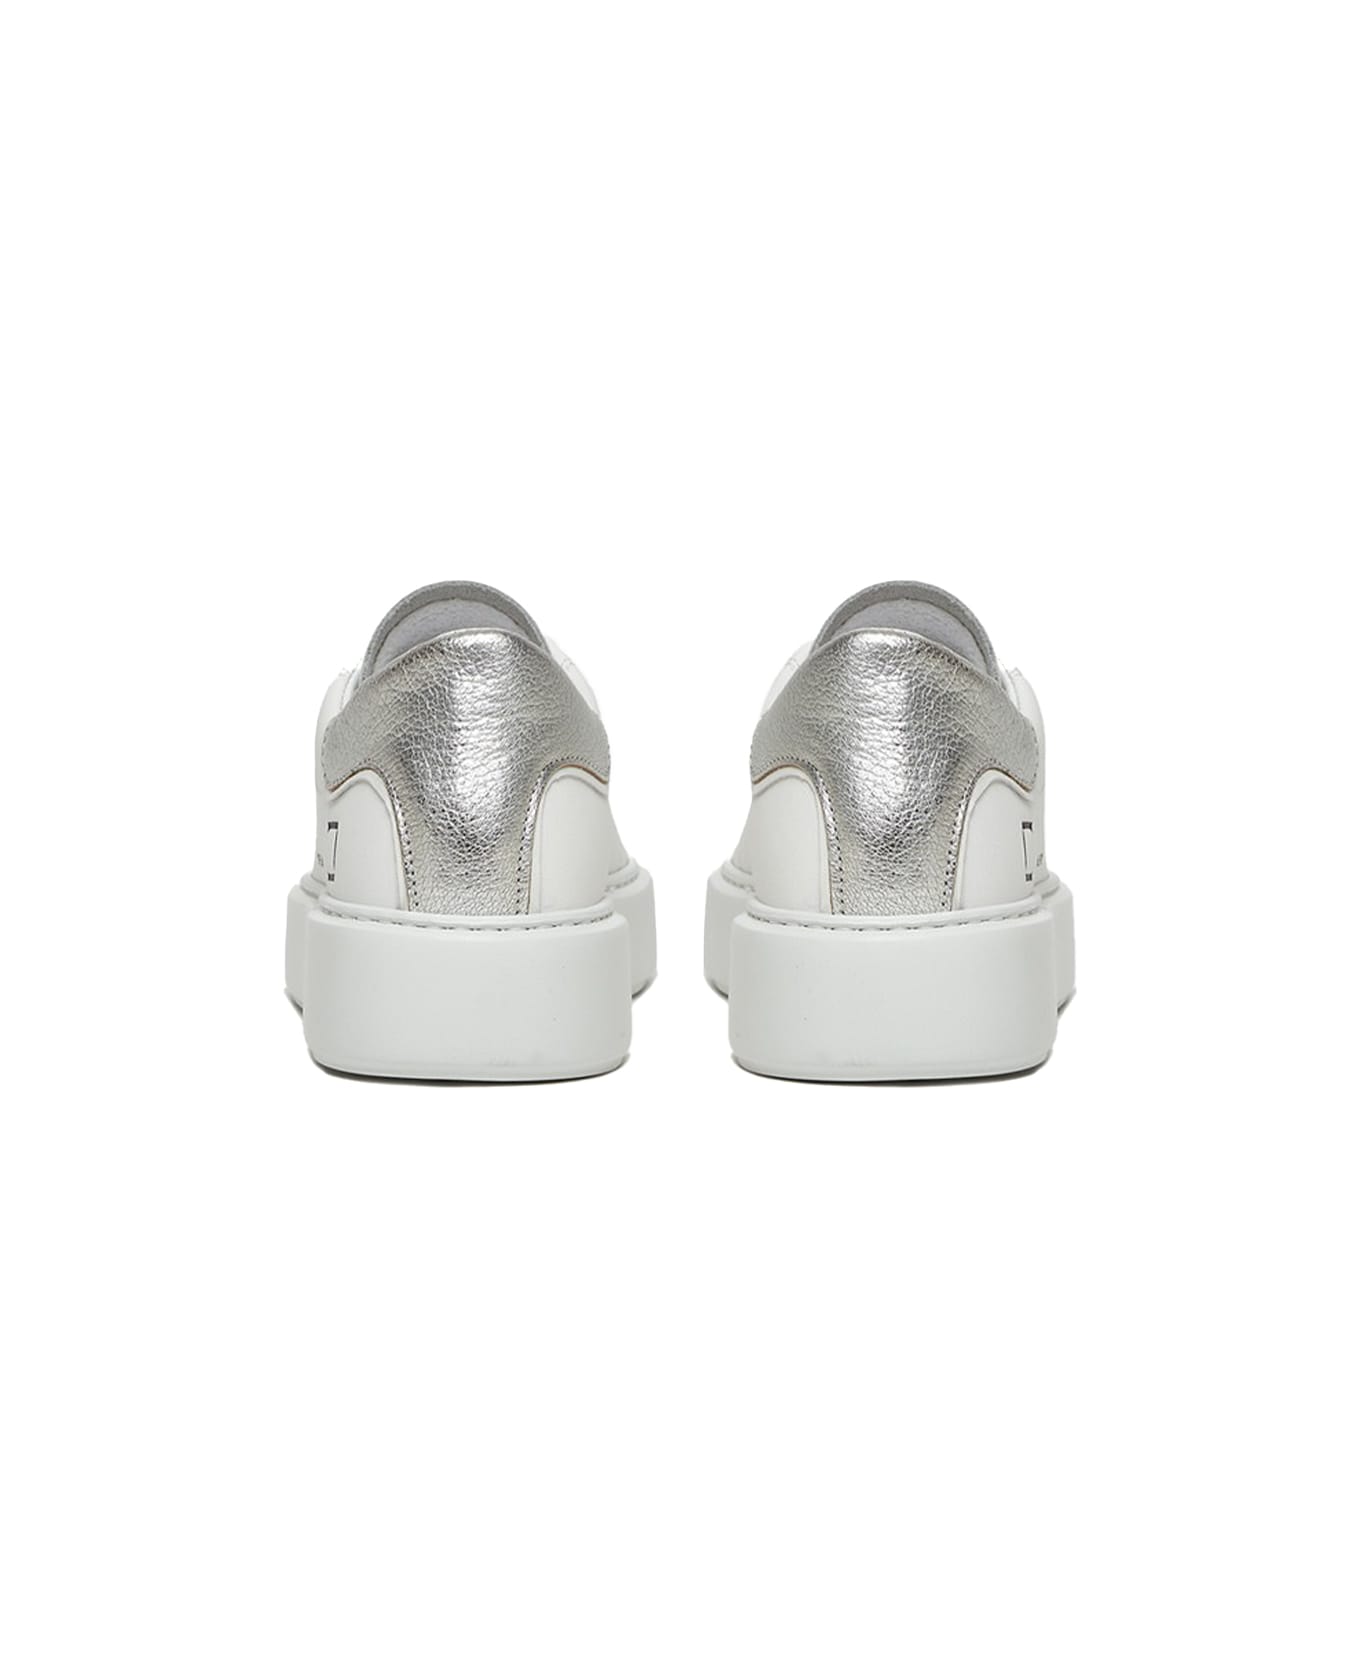 D.A.T.E. Sfera Women's Sneaker In Leather And Silver Heel スニーカー